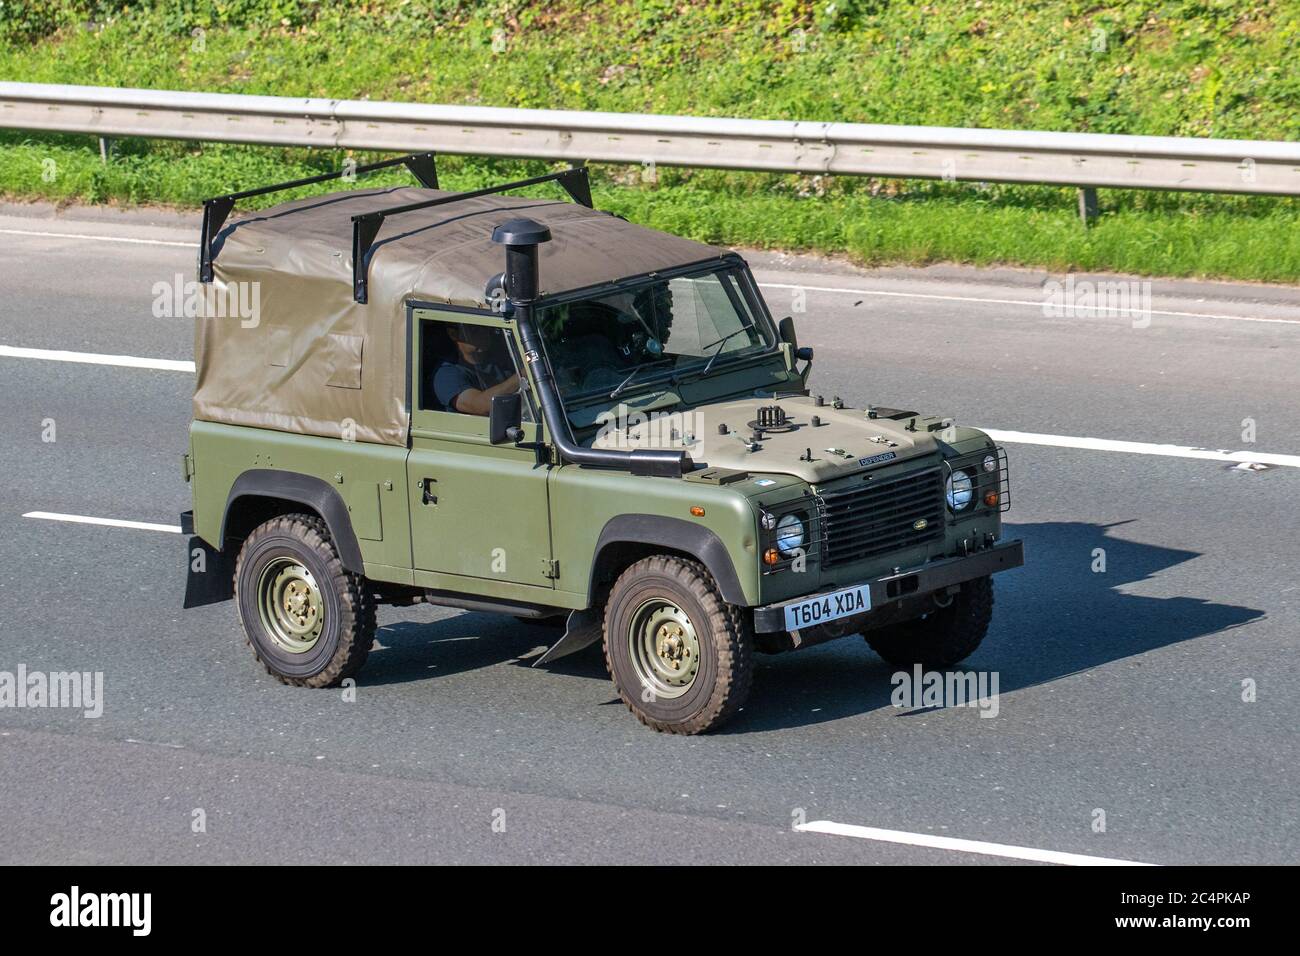 1999 90s green Army style SWB 2495 diesel Land Rover ; Vehicular traffic moving vehicles, cars driving vehicle on UK roads, motors, motoring on the M6 motorway highway network. Stock Photo